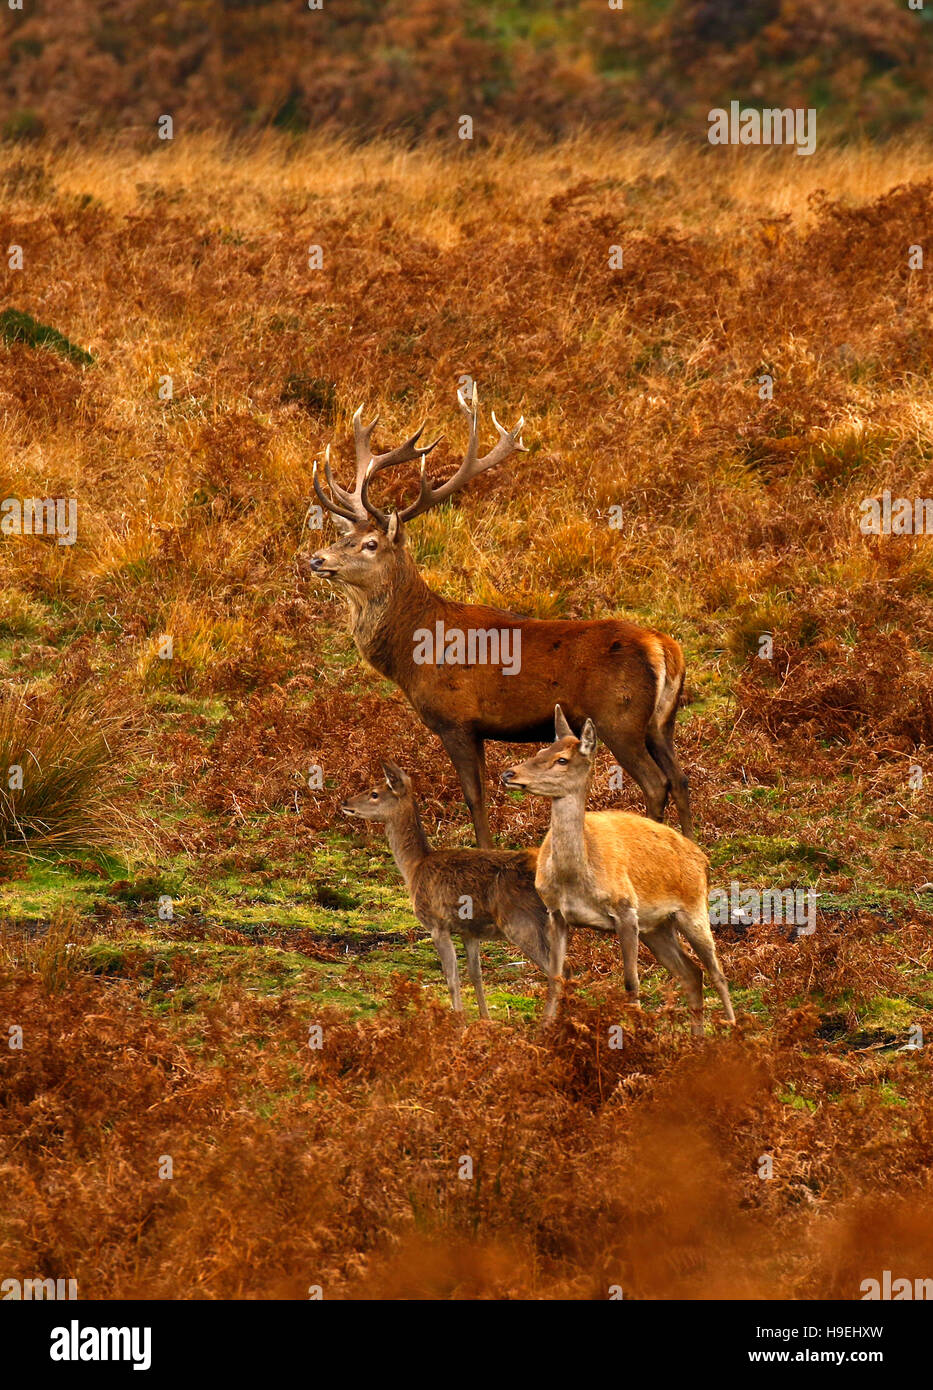 Herd of Red deer on Exmoor during the rut with magnificent red stags fighting for supremacy to mate with the hinds or females. Stock Photo